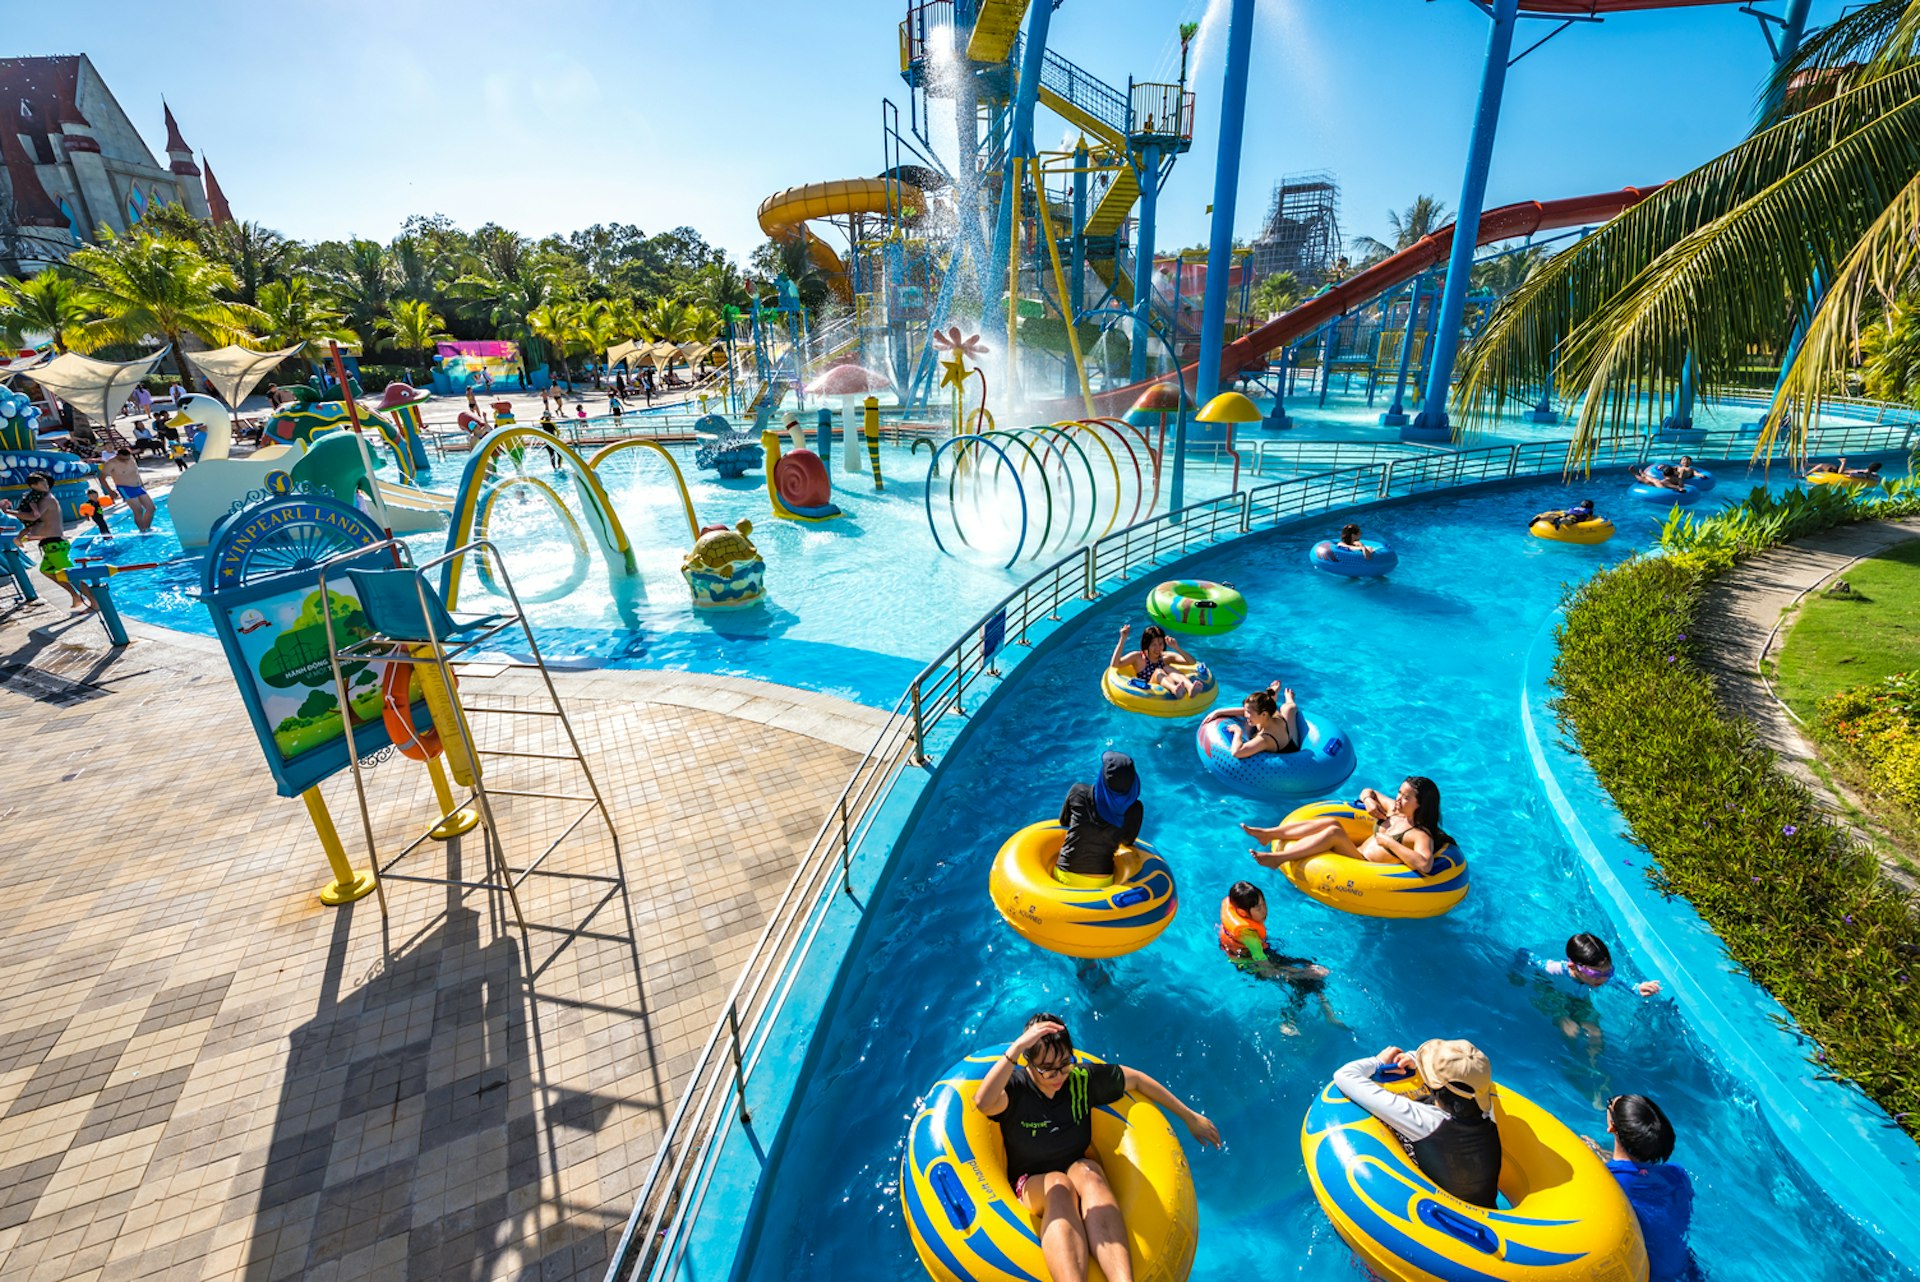 People float along in yellow rubber rings at a water park with lots of splash pools and slides